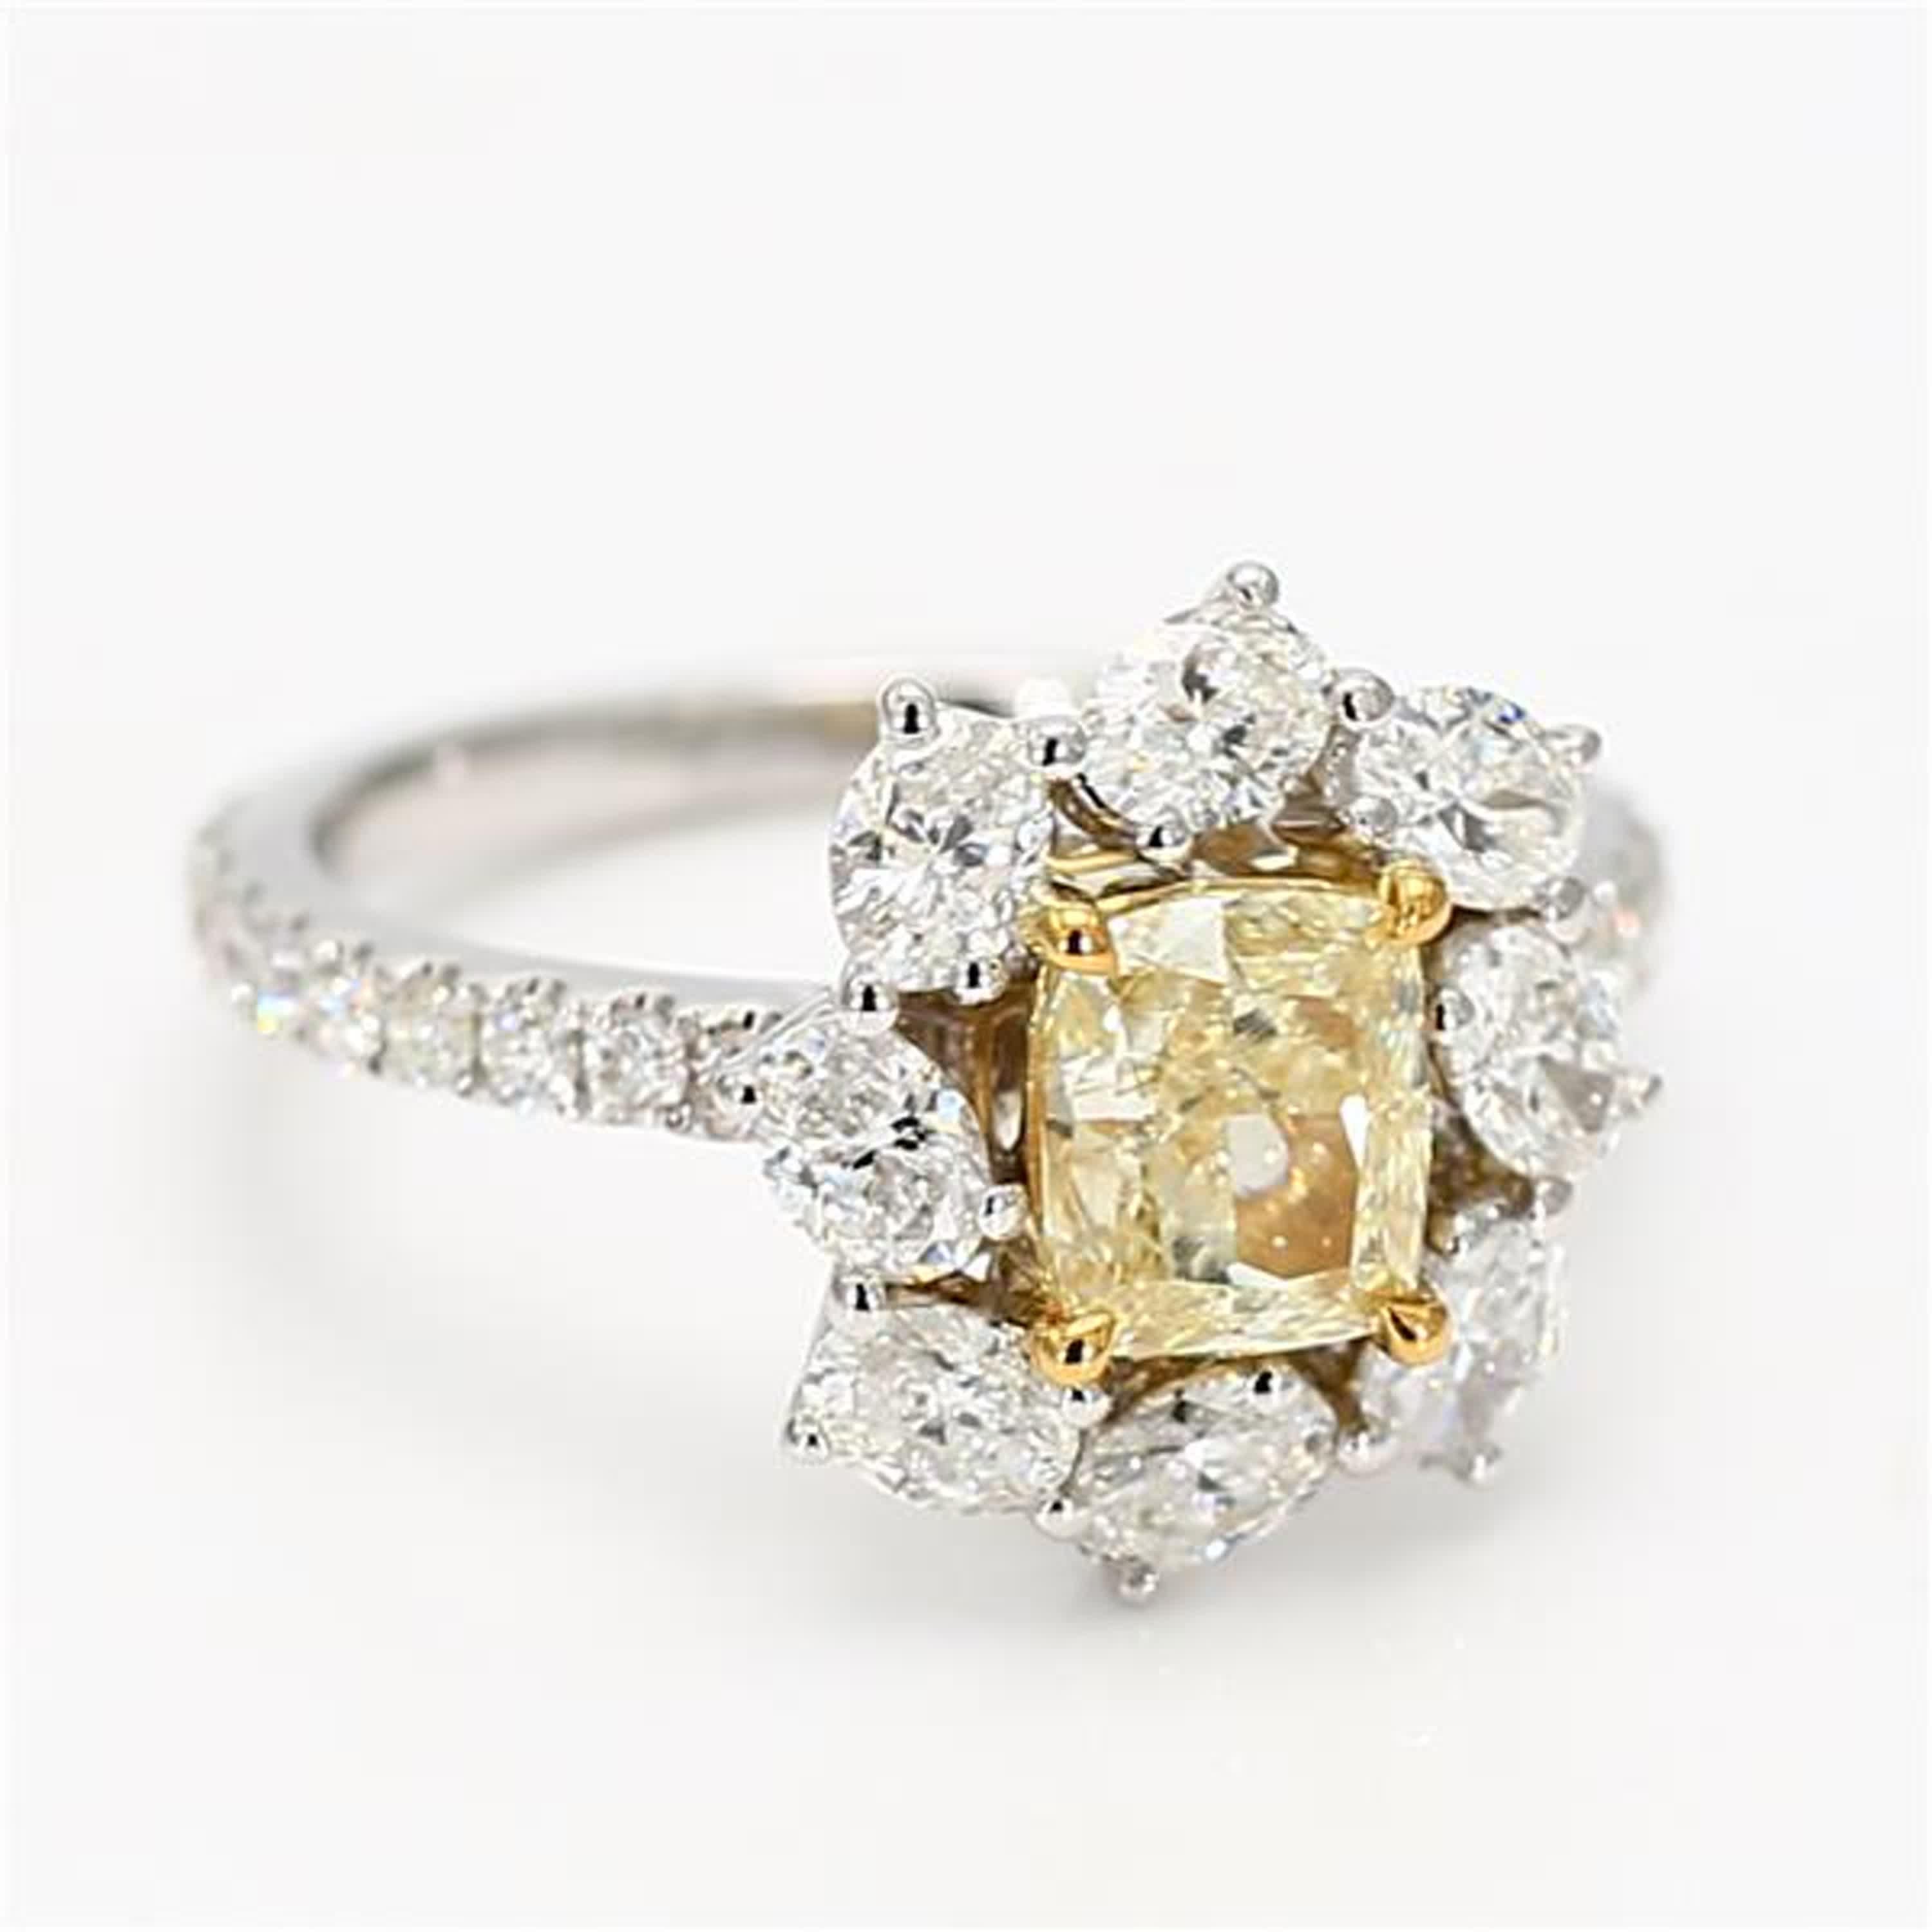 GIA Certified Natural Yellow Cushion Diamond 2.66 Carat TW Gold Cocktail Ring For Sale 2